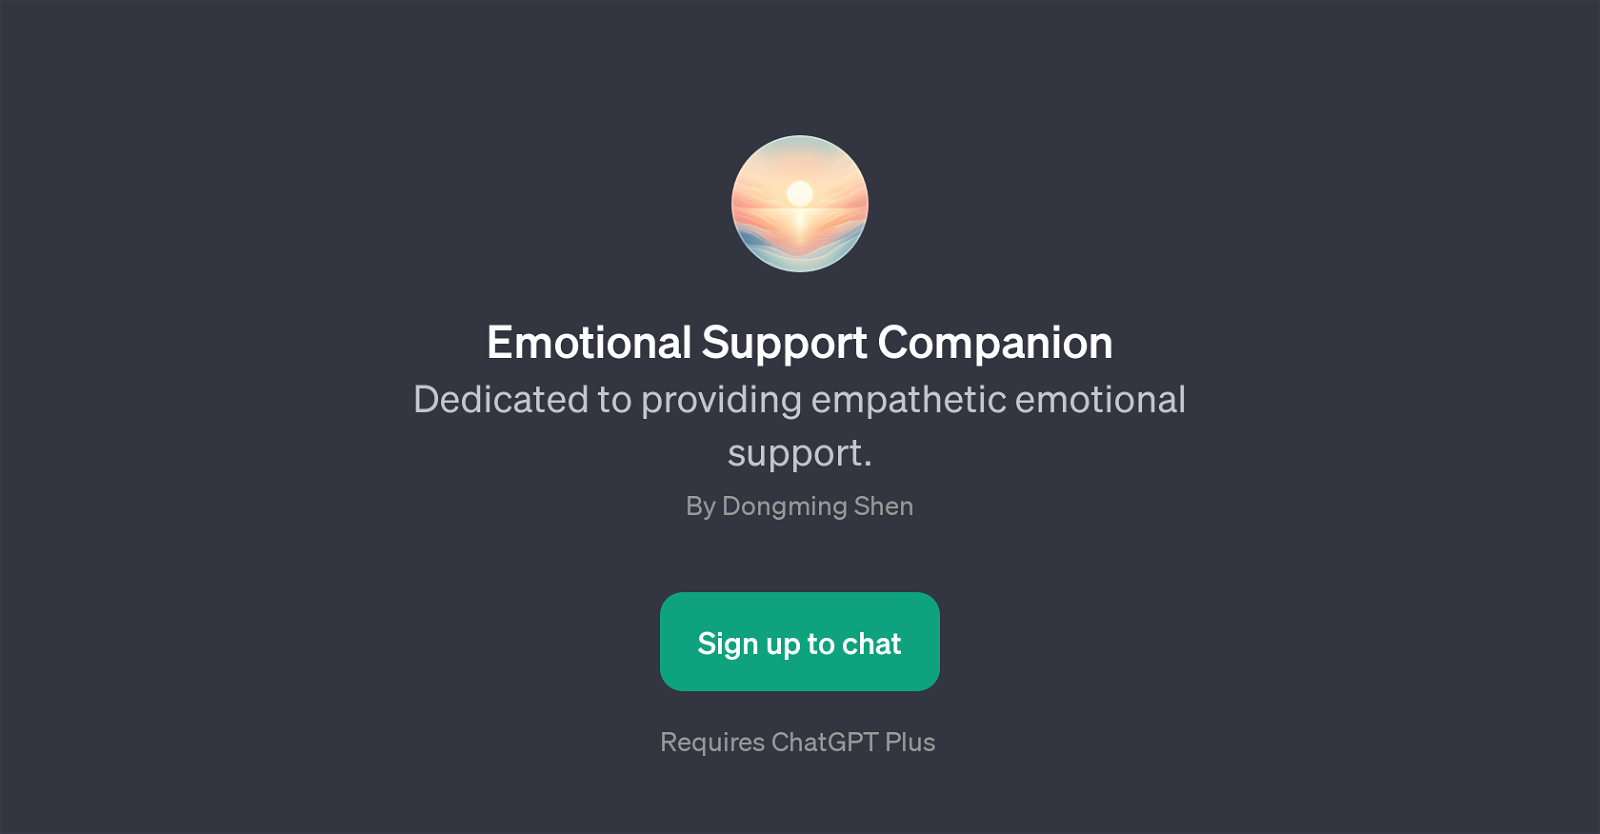 Emotional Support Companion website